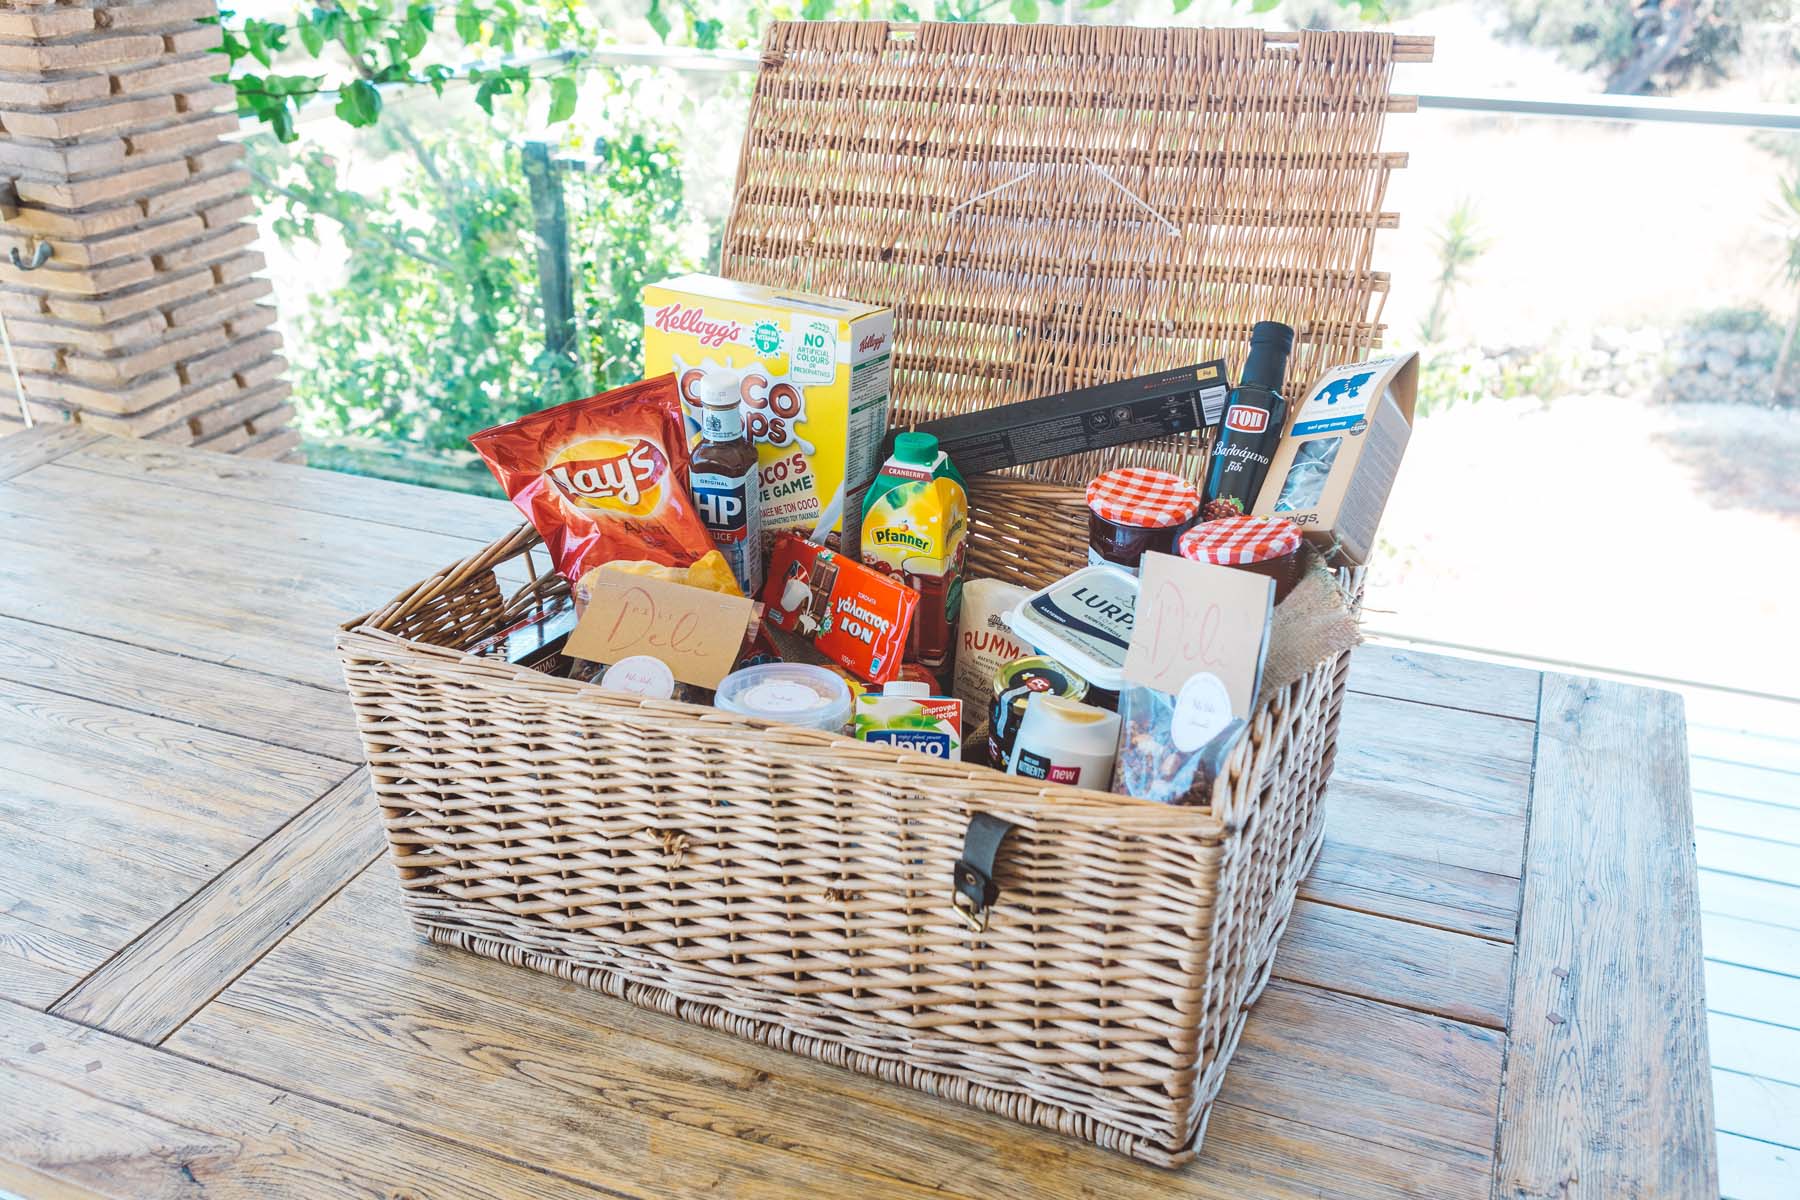 A hamper with food items